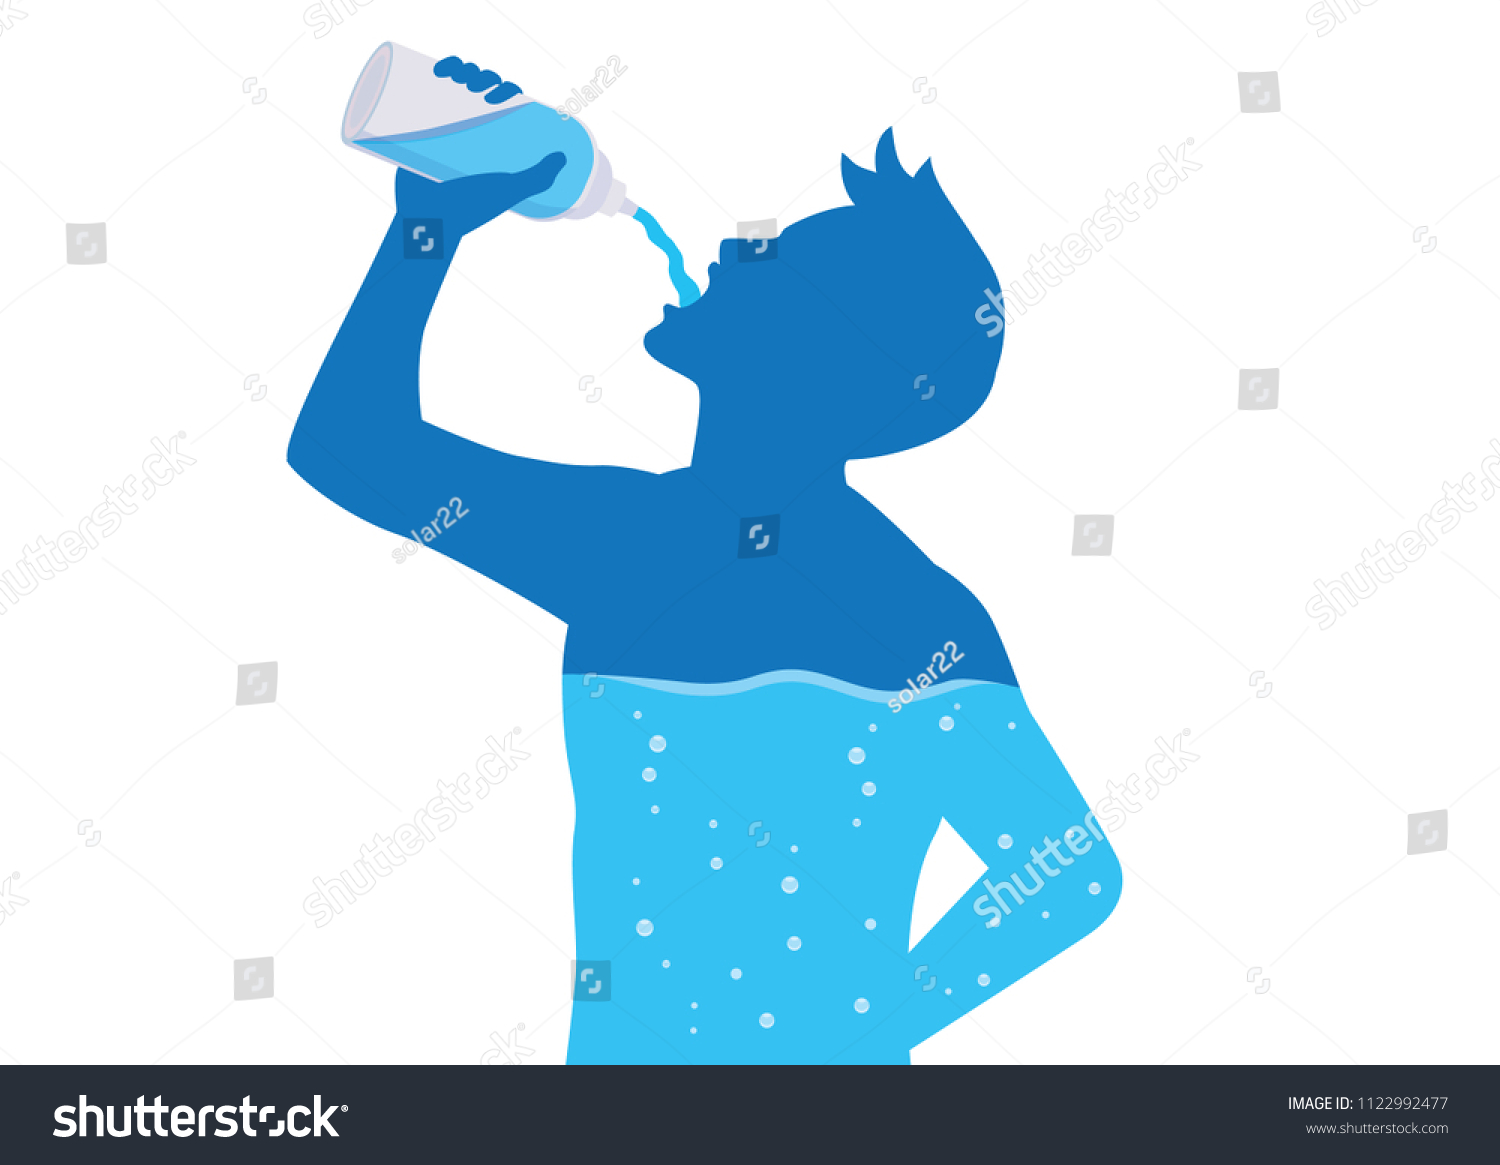 Silhouette of  man drinking water from bottle flow into body. Illustration about healthy lifestyle. #1122992477